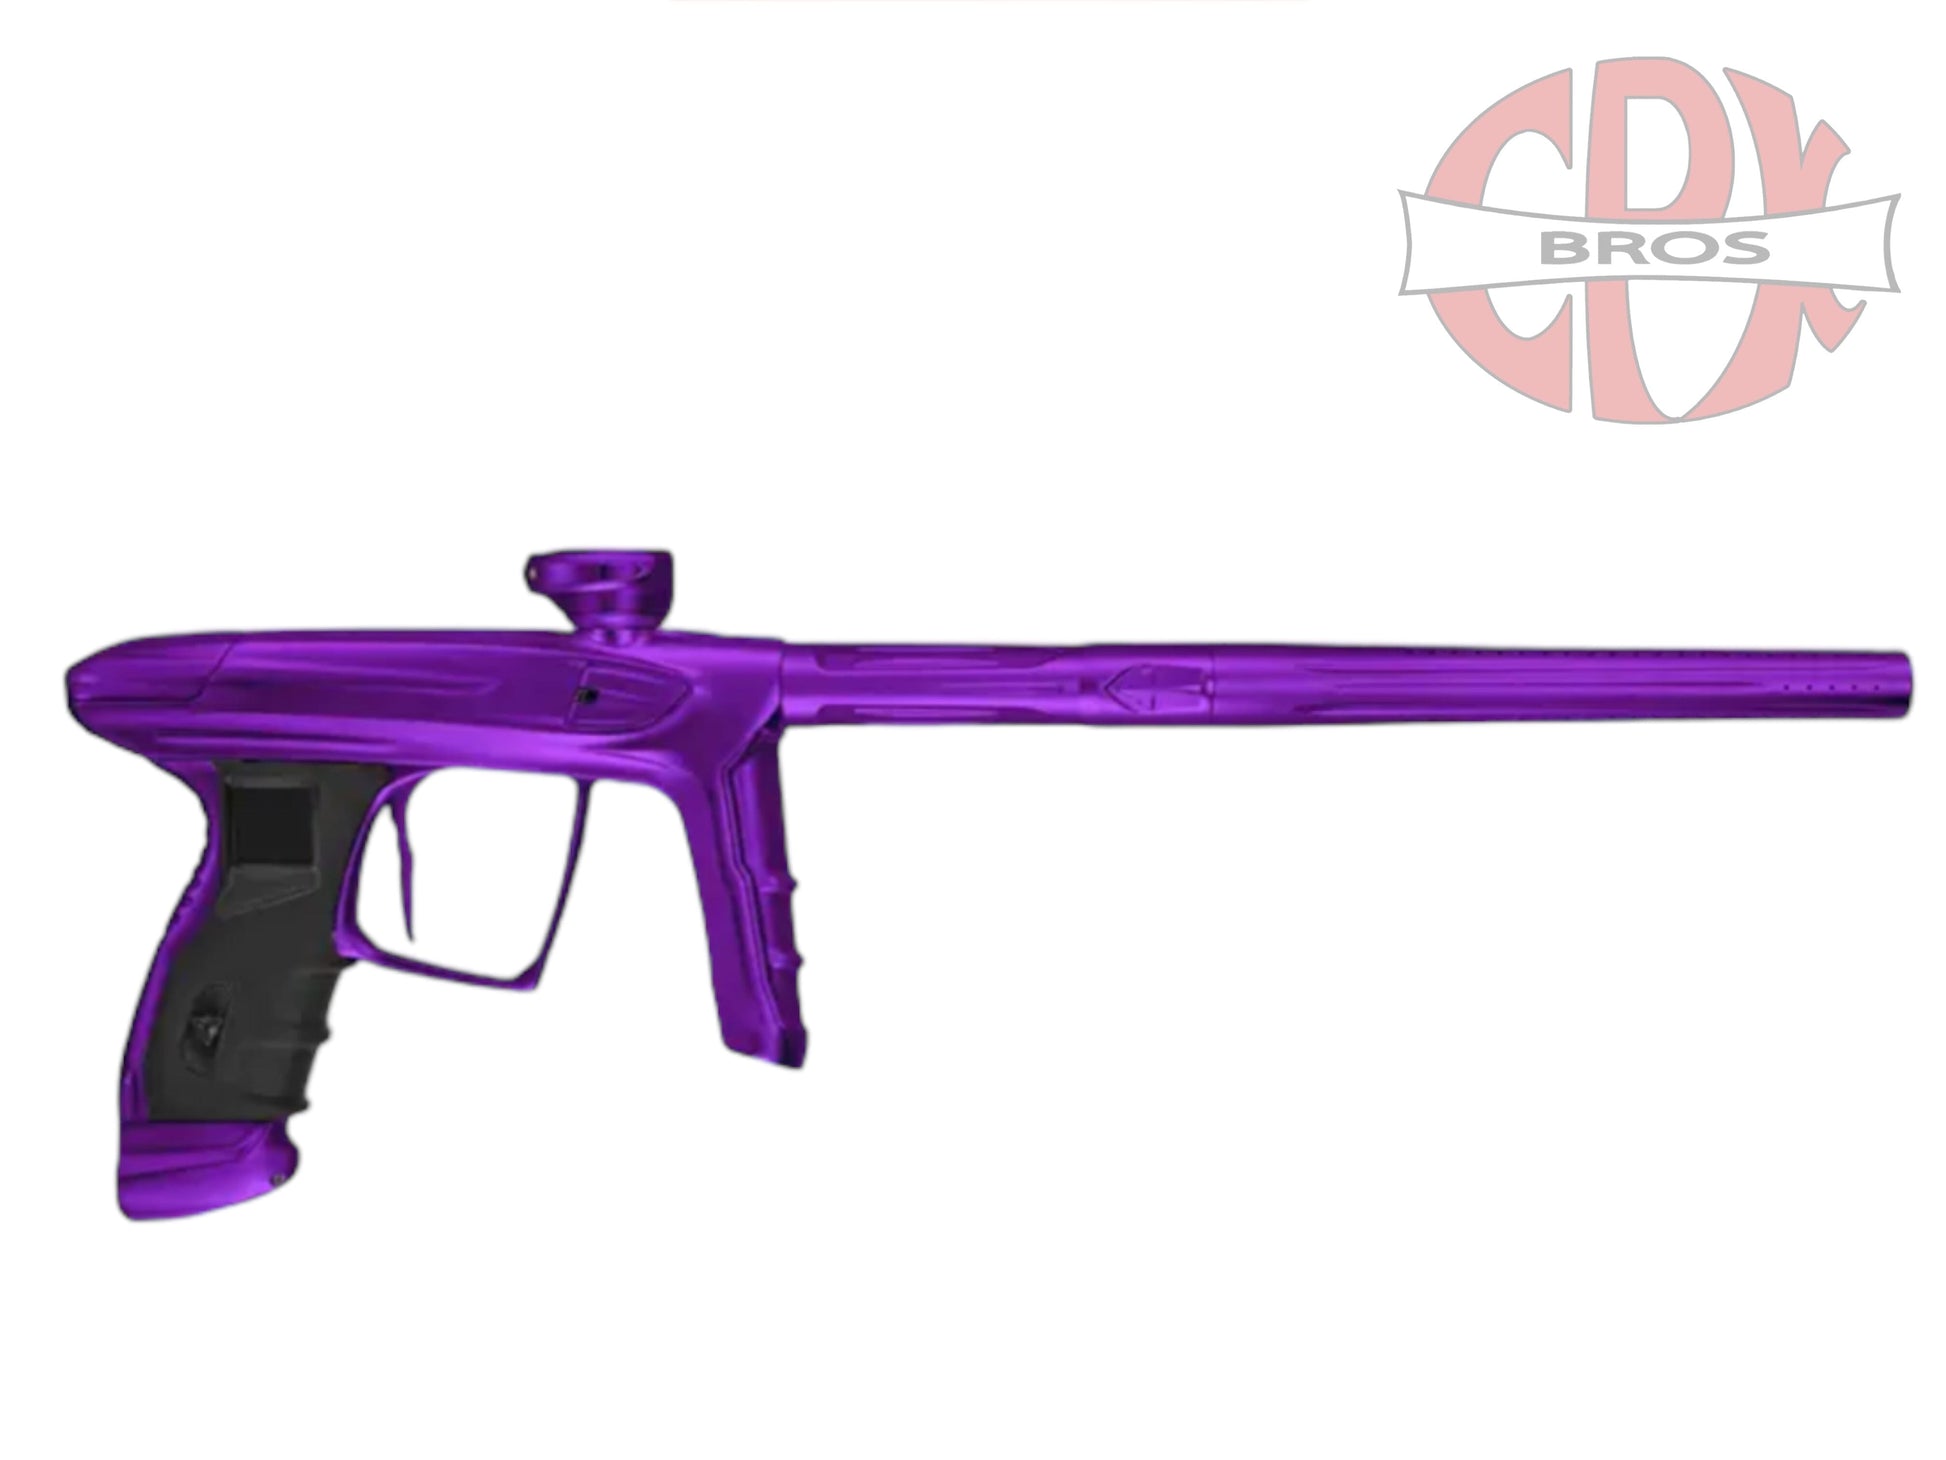 Used (Pre-Order) DLX Luxe IDOL Dust Purple / Dust Purple Paintball Gun from CPXBrosPaintball Buy/Sell/Trade Paintball Markers, New Paintball Guns, Paintball Hoppers, Paintball Masks, and Hormesis Headbands